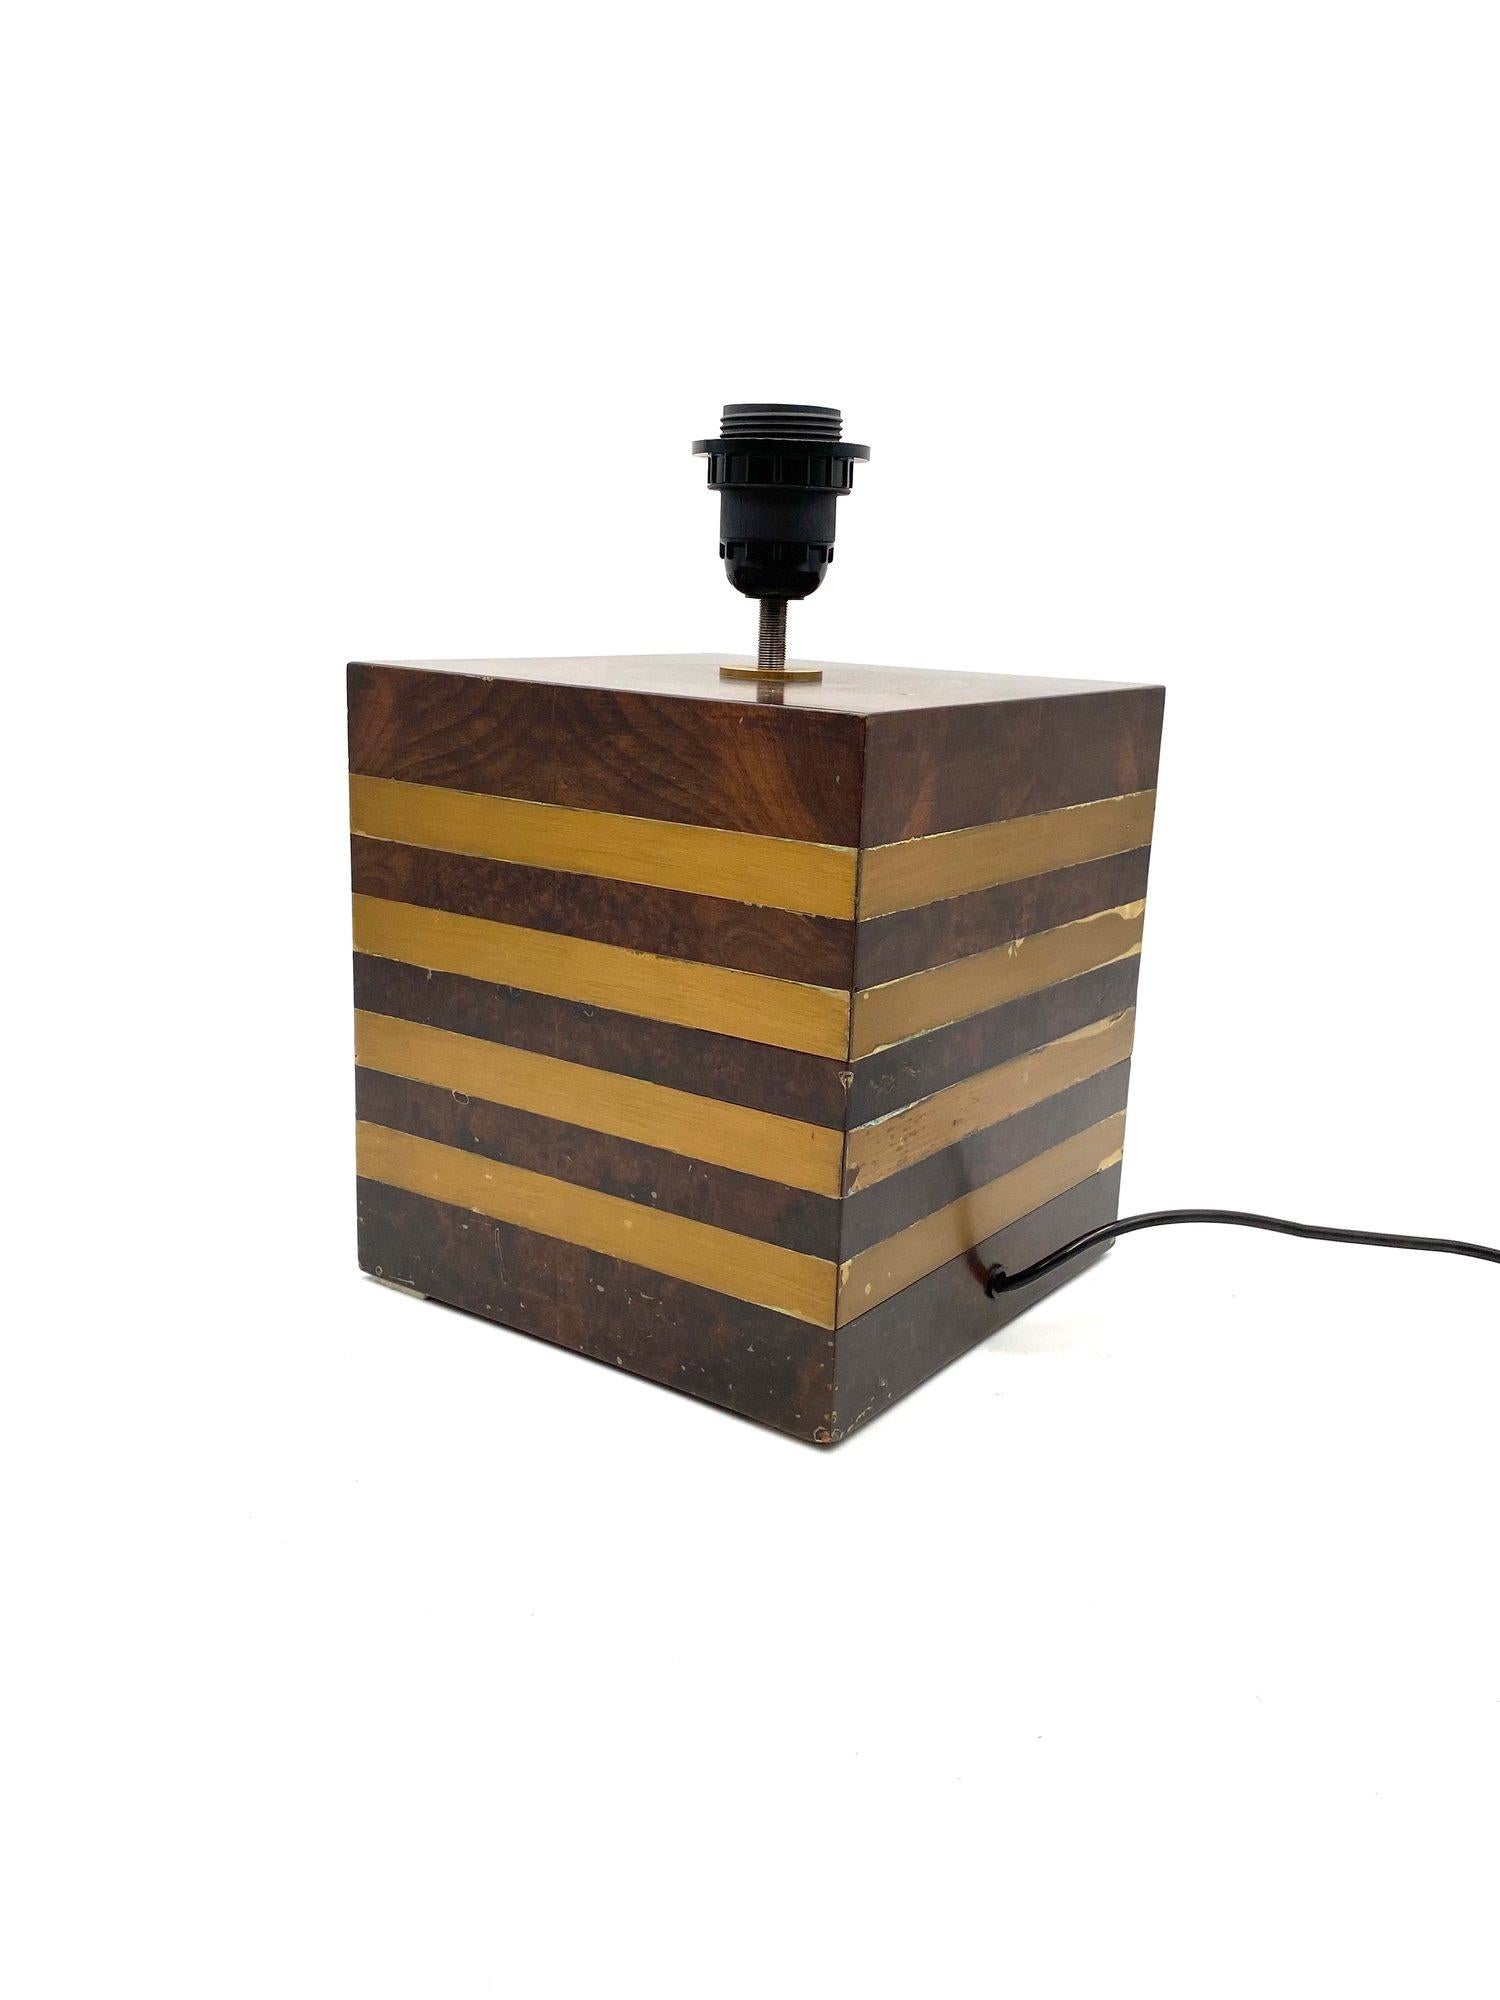 Cubic hollywood regency wooden table lamp base with brass stripes

Italian manufacture, 1970s

33 cm H - 20 x 20 cm

Conditions: very good overall conditions, wear consistent with age and use.